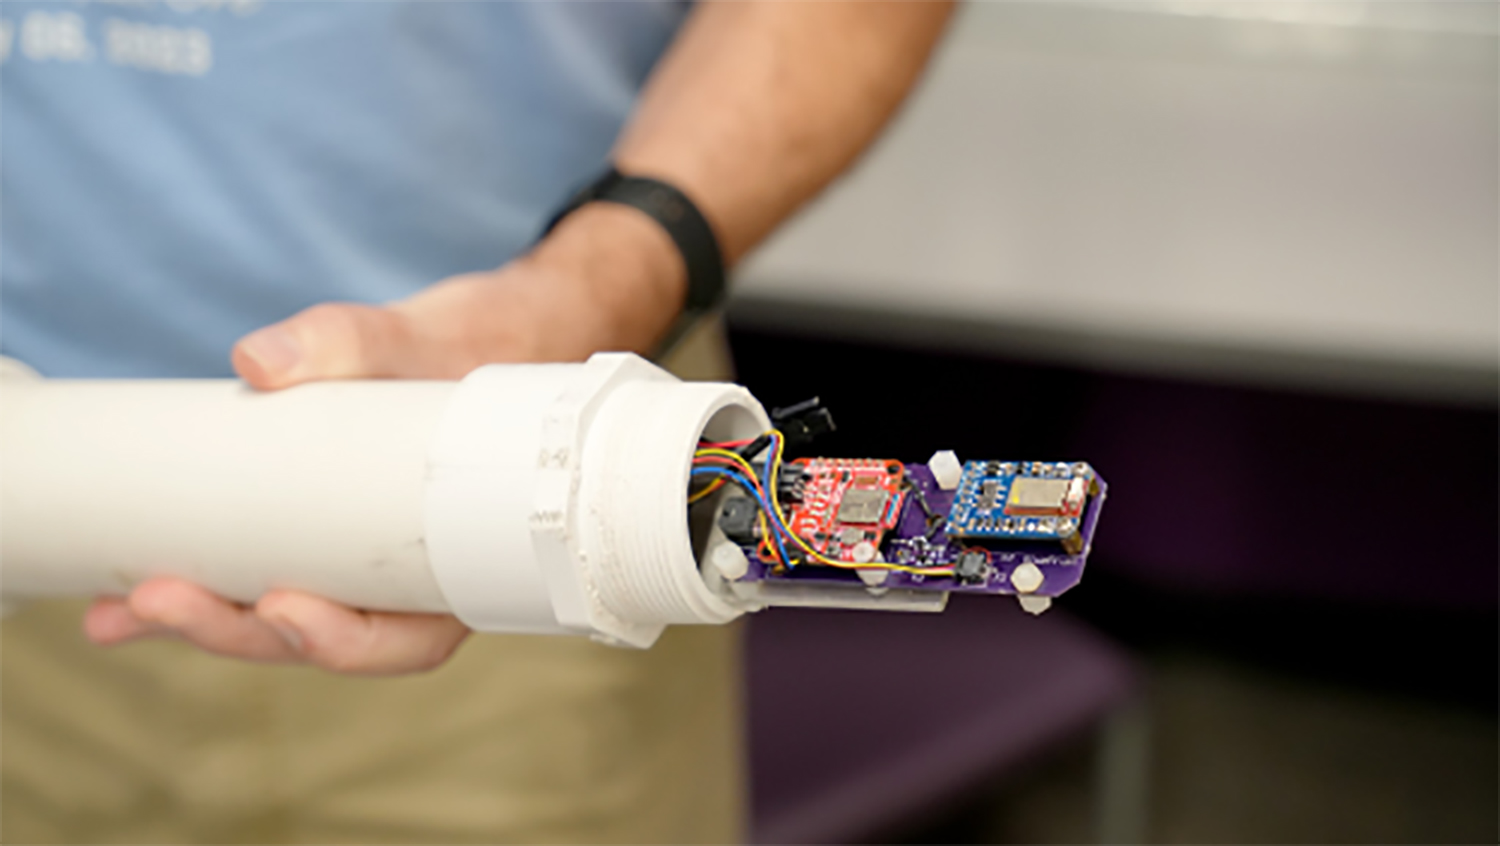 Student holding a large, white PVC pipe with an electronic sensor inside.